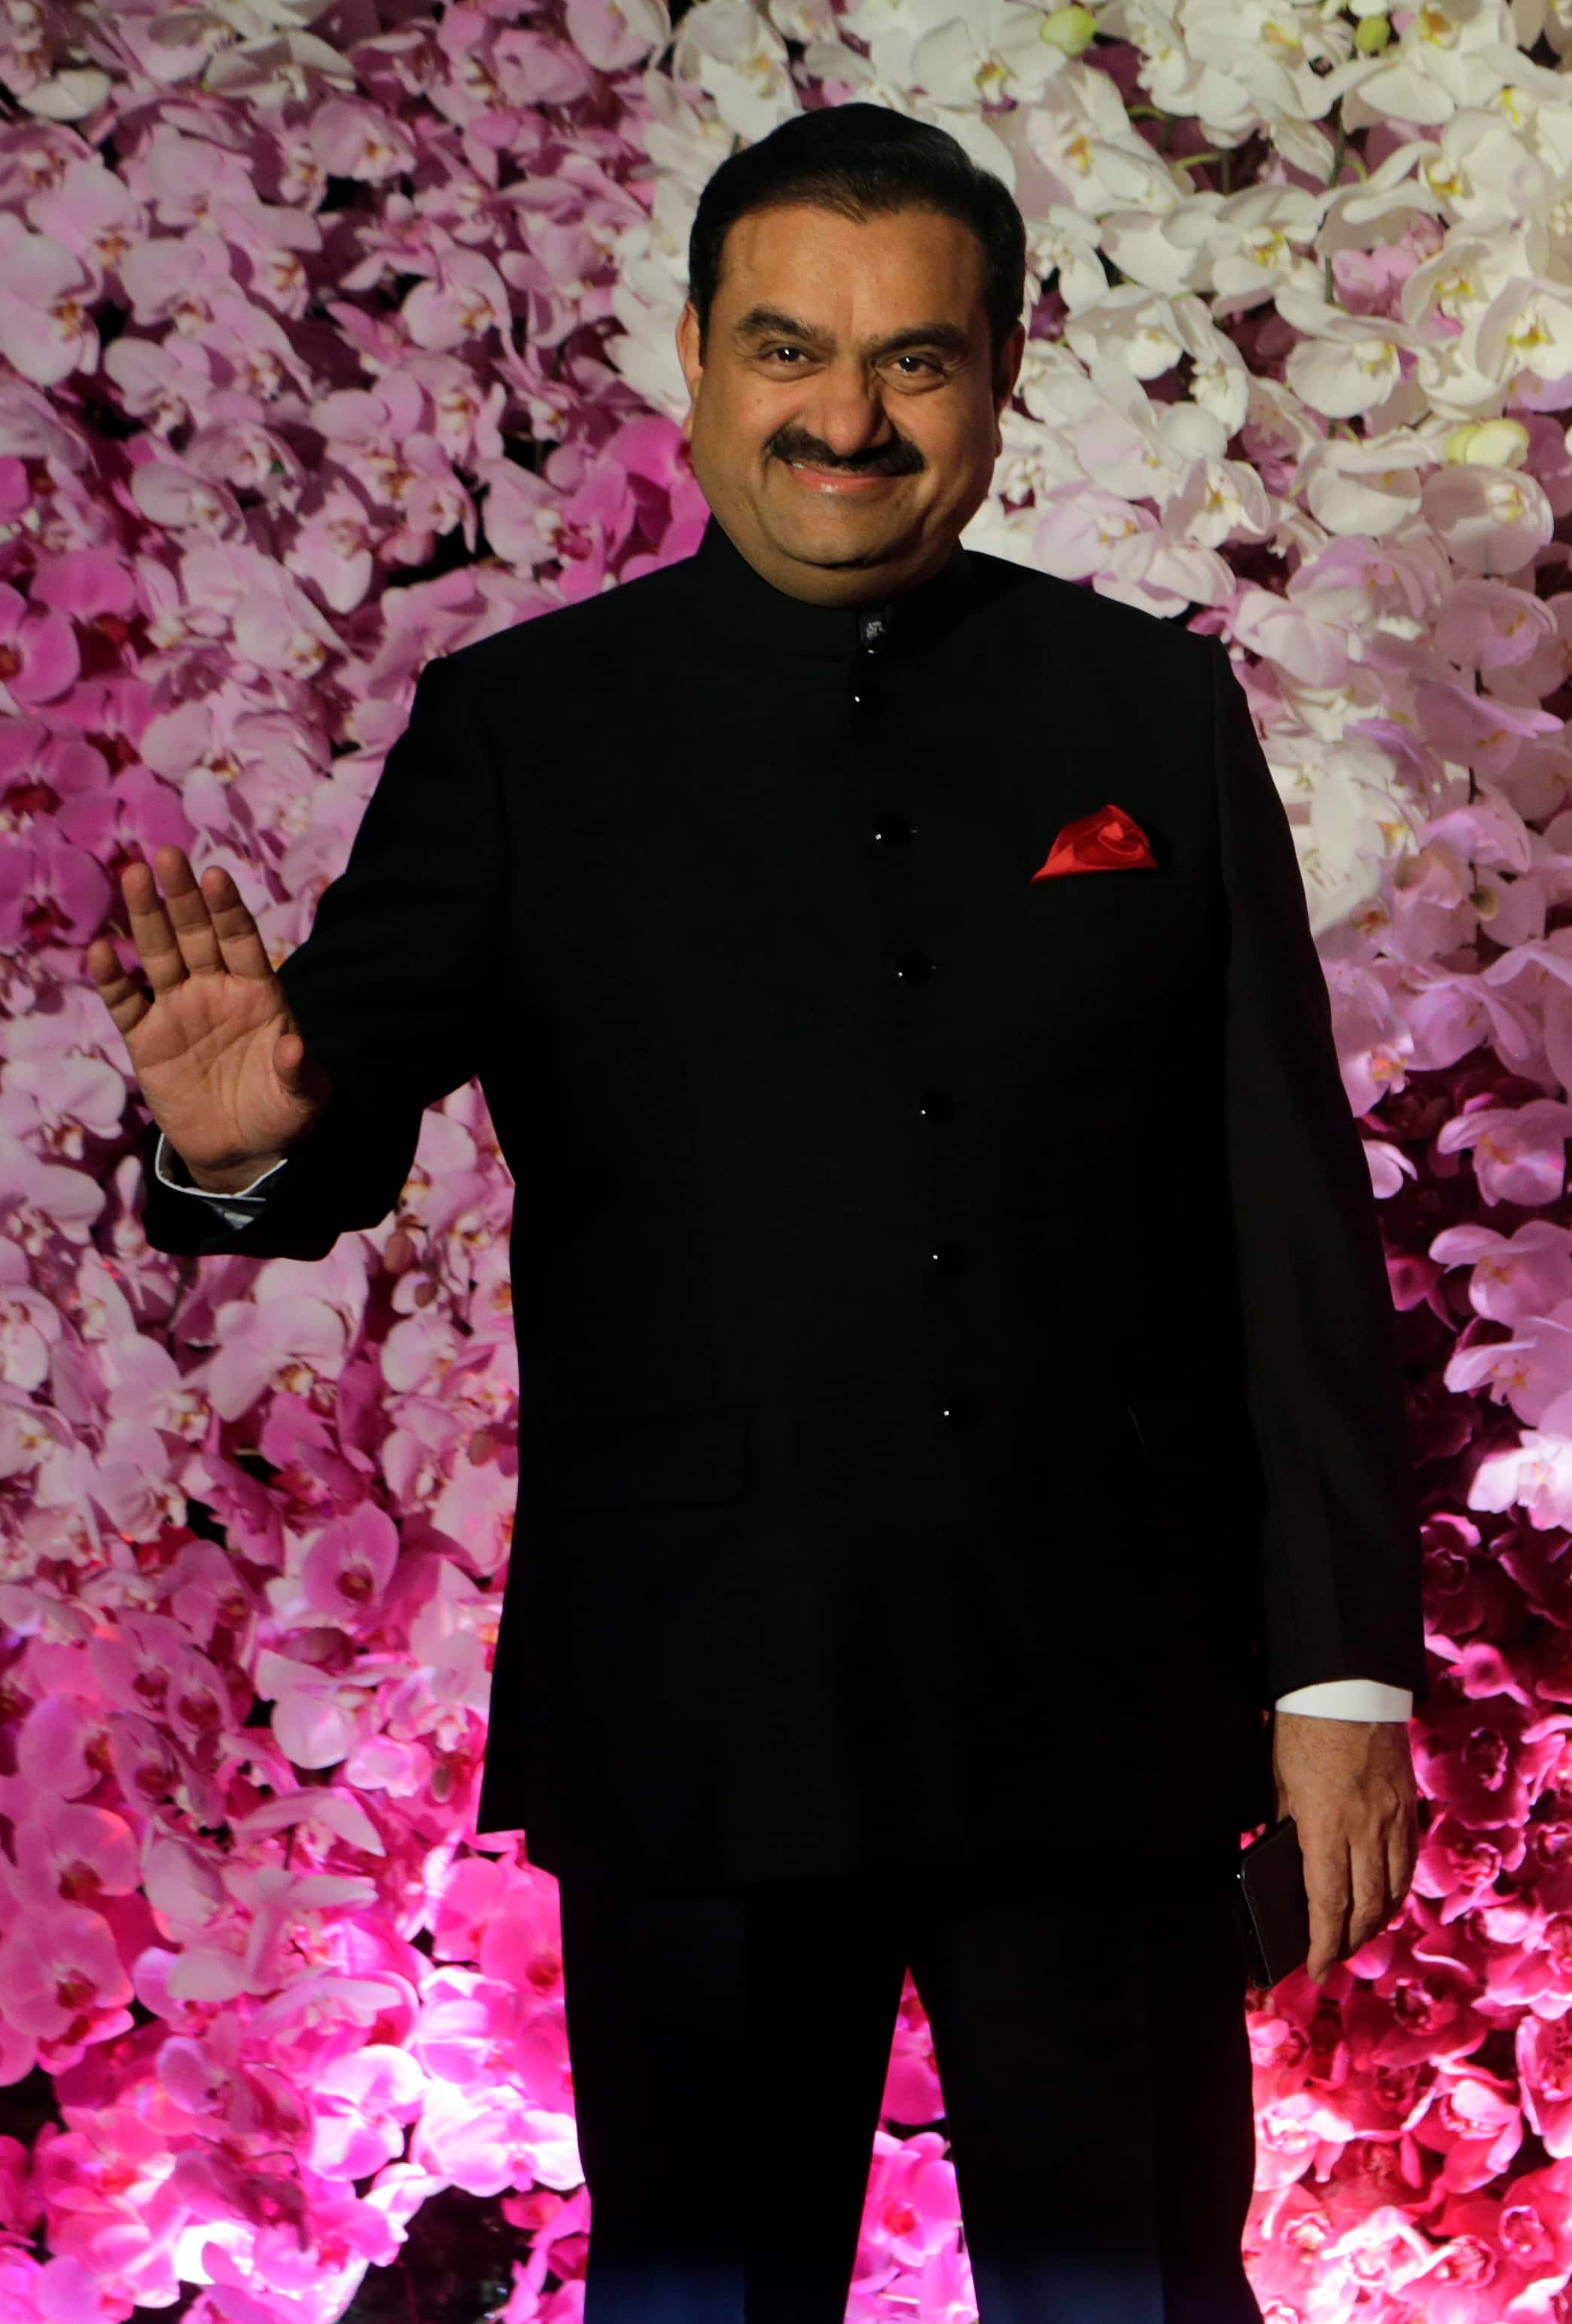 FILE- Adani Group Gautam Chairman Gautam Adani poses during Akash Ambani's wedding reception in Mumbai, India, March 10, 2019. Asia’s richest man, Gautam Adani, made his vast fortune betting on coal as an energy hungry India grew swiftly after liberalizing its economy in the 1990s. He's now set his sights on becoming world's biggest renewable energy player, by 2030, adroitly aligning his investments with the government’s own priorities. (AP Photo/Rajanish Kakade, File)